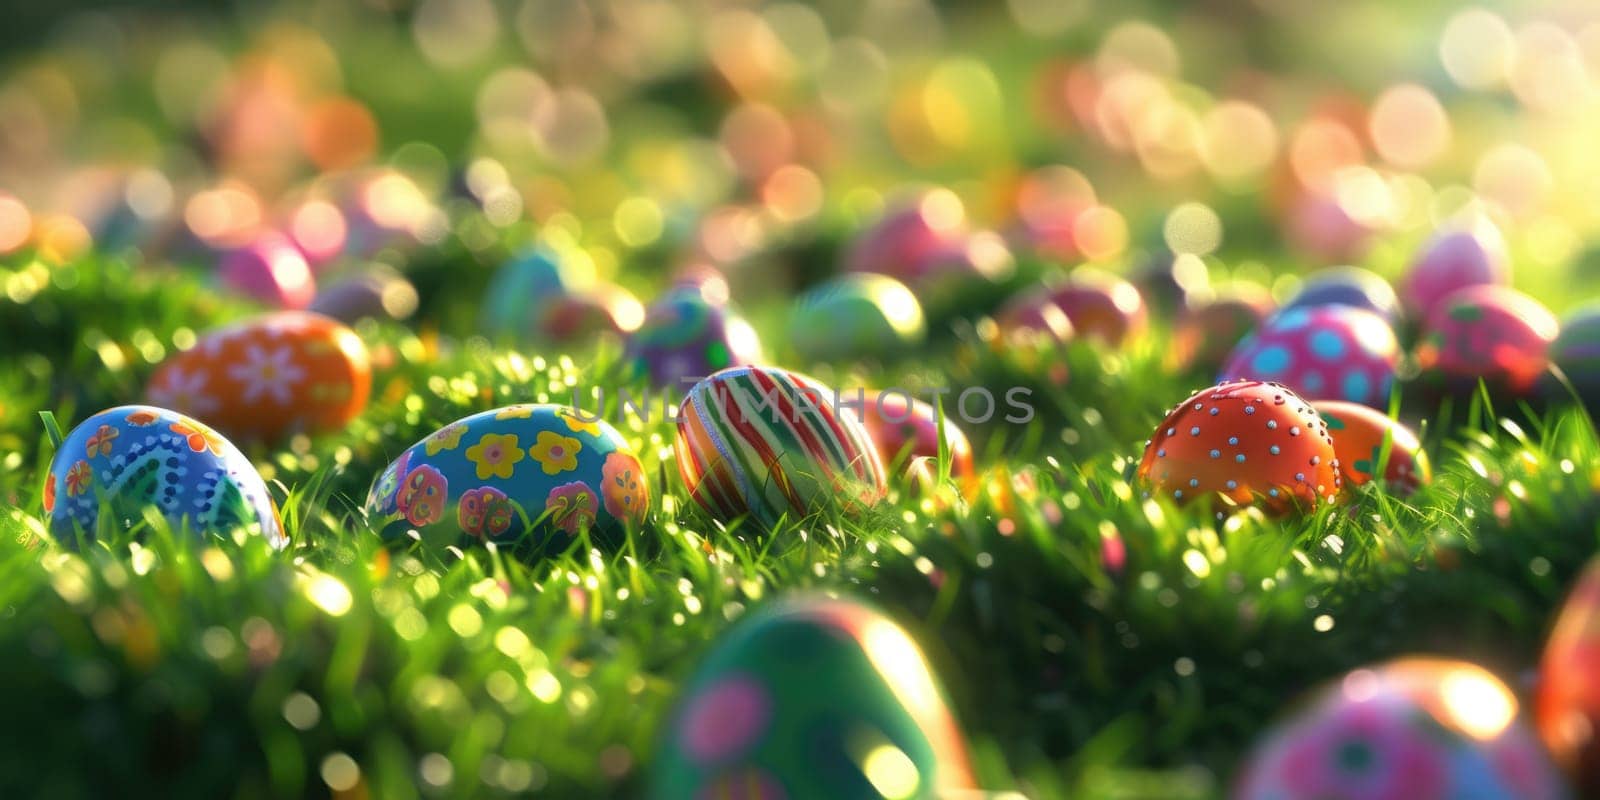 A variety of vibrant Easter eggs are displayed on the grass, creating a colorful and festive event. The eggs showcase intricate patterns and are made of natural materials AIG42E